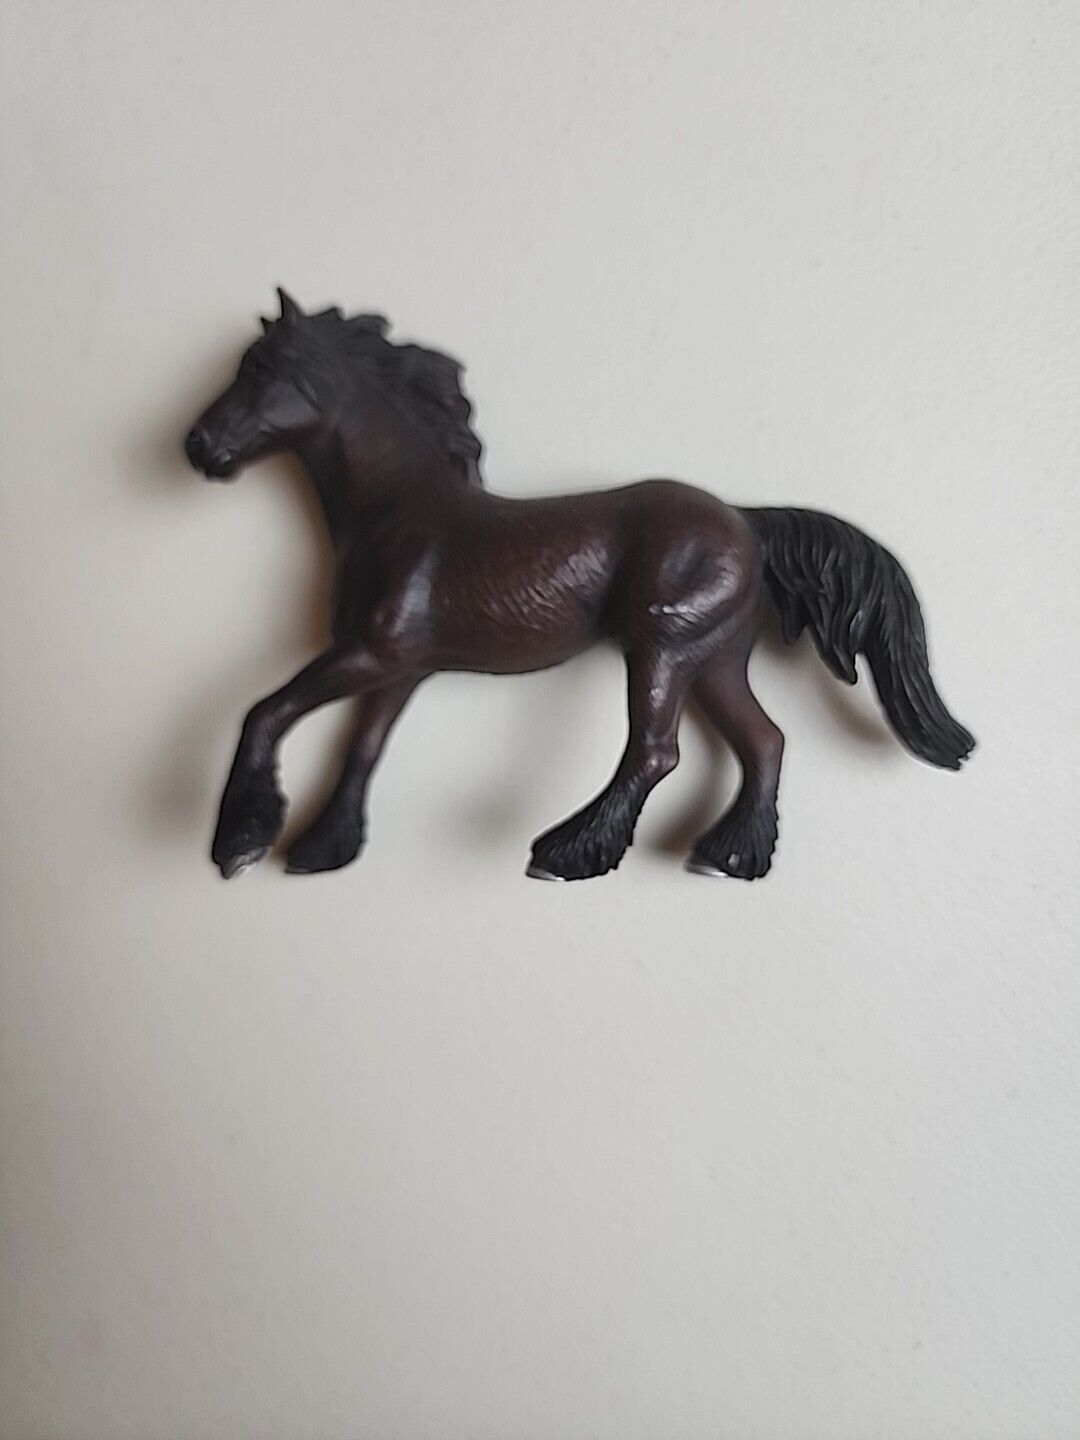 2005 Retired Schleich Friesian Mare Black & Brown Hairy Horse Figure Germany